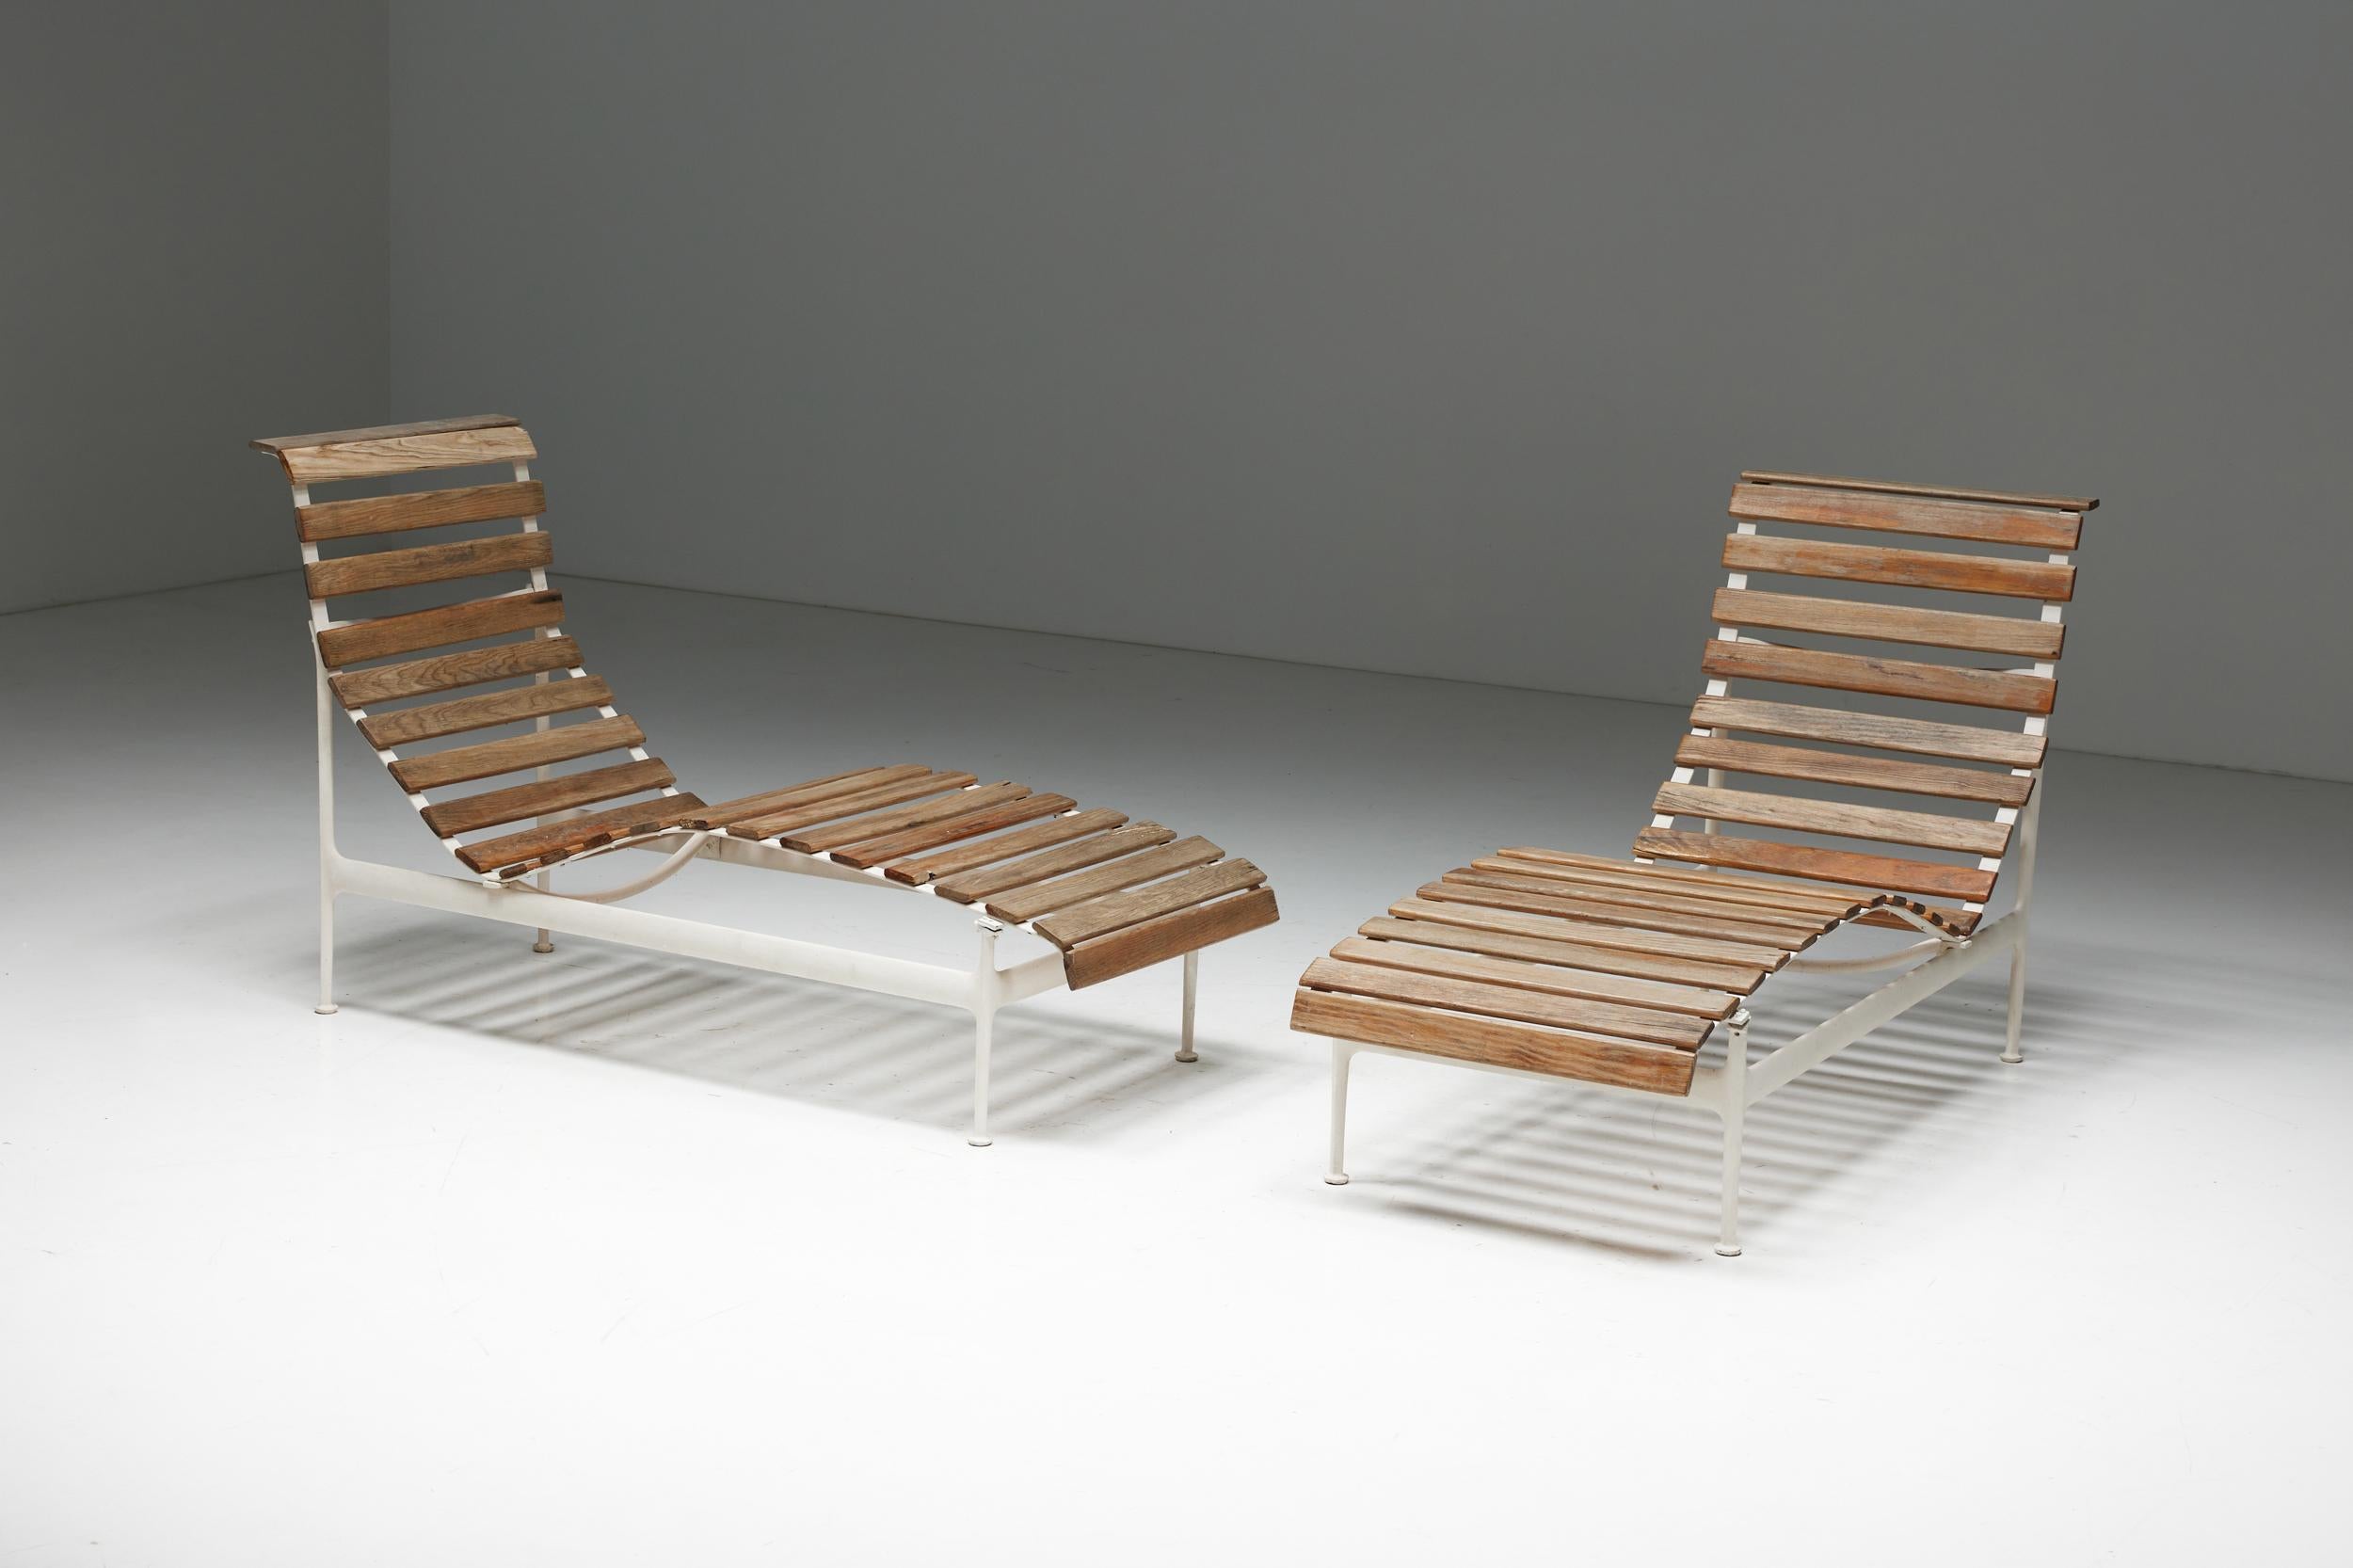 Modernism; Knoll International; Minimalist Design; Florence Knoll; 1966; Richard Schultz; Florida; United States; Outdoor Furniture;

Chaises longues by Richard Schultz from his 1966 collection. Designed at the request of Florence Knoll, who after